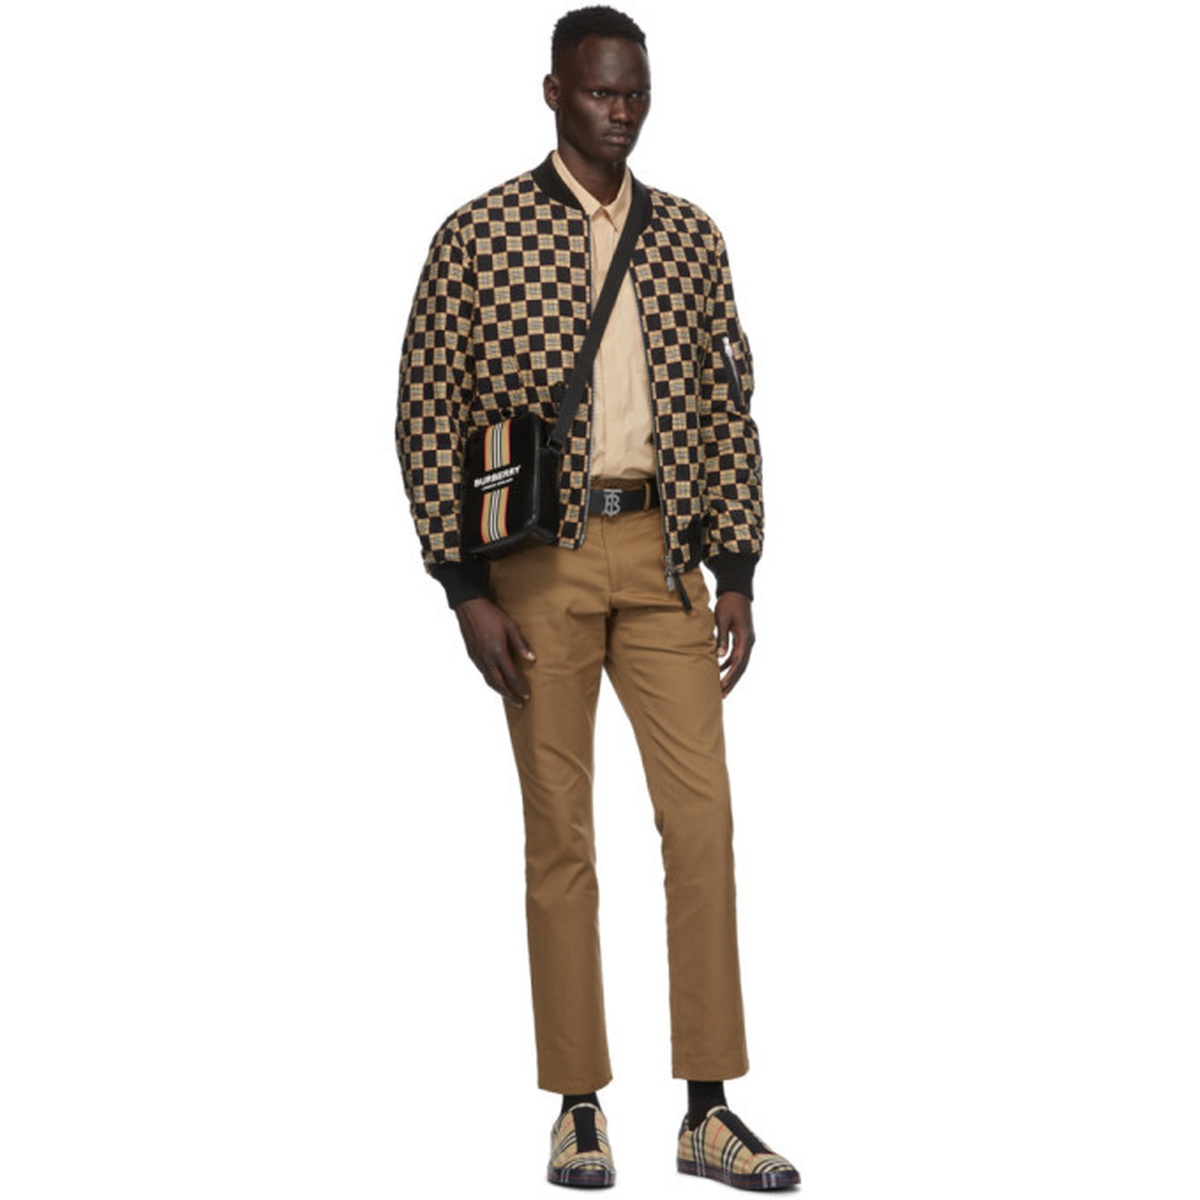 Burberry Black and Beige Checkered Brookland Bomber Jacket Burberry